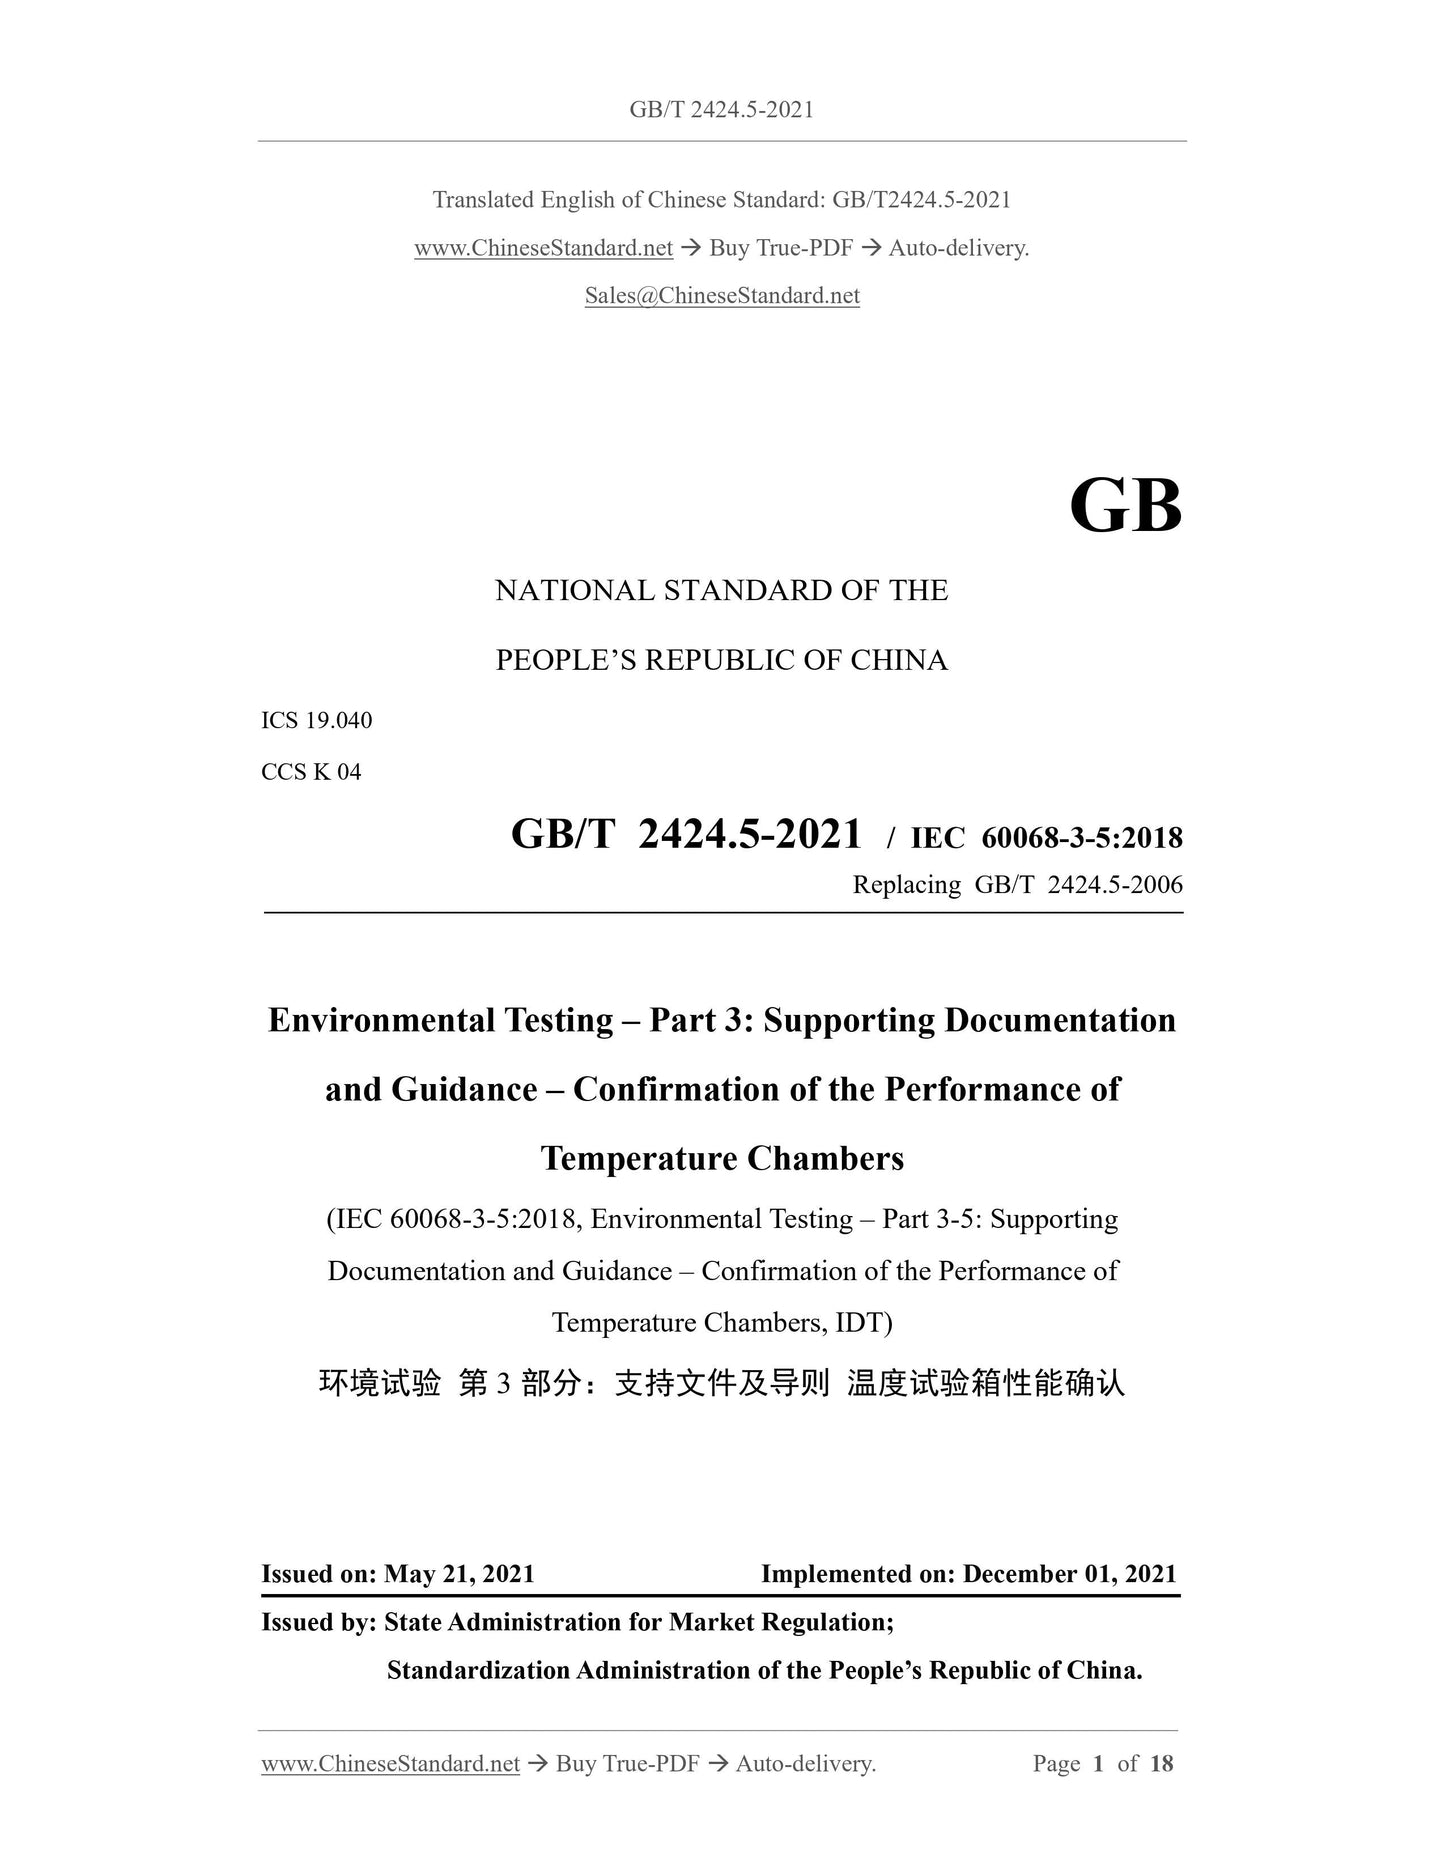 GB/T 2424.5-2021 Page 1